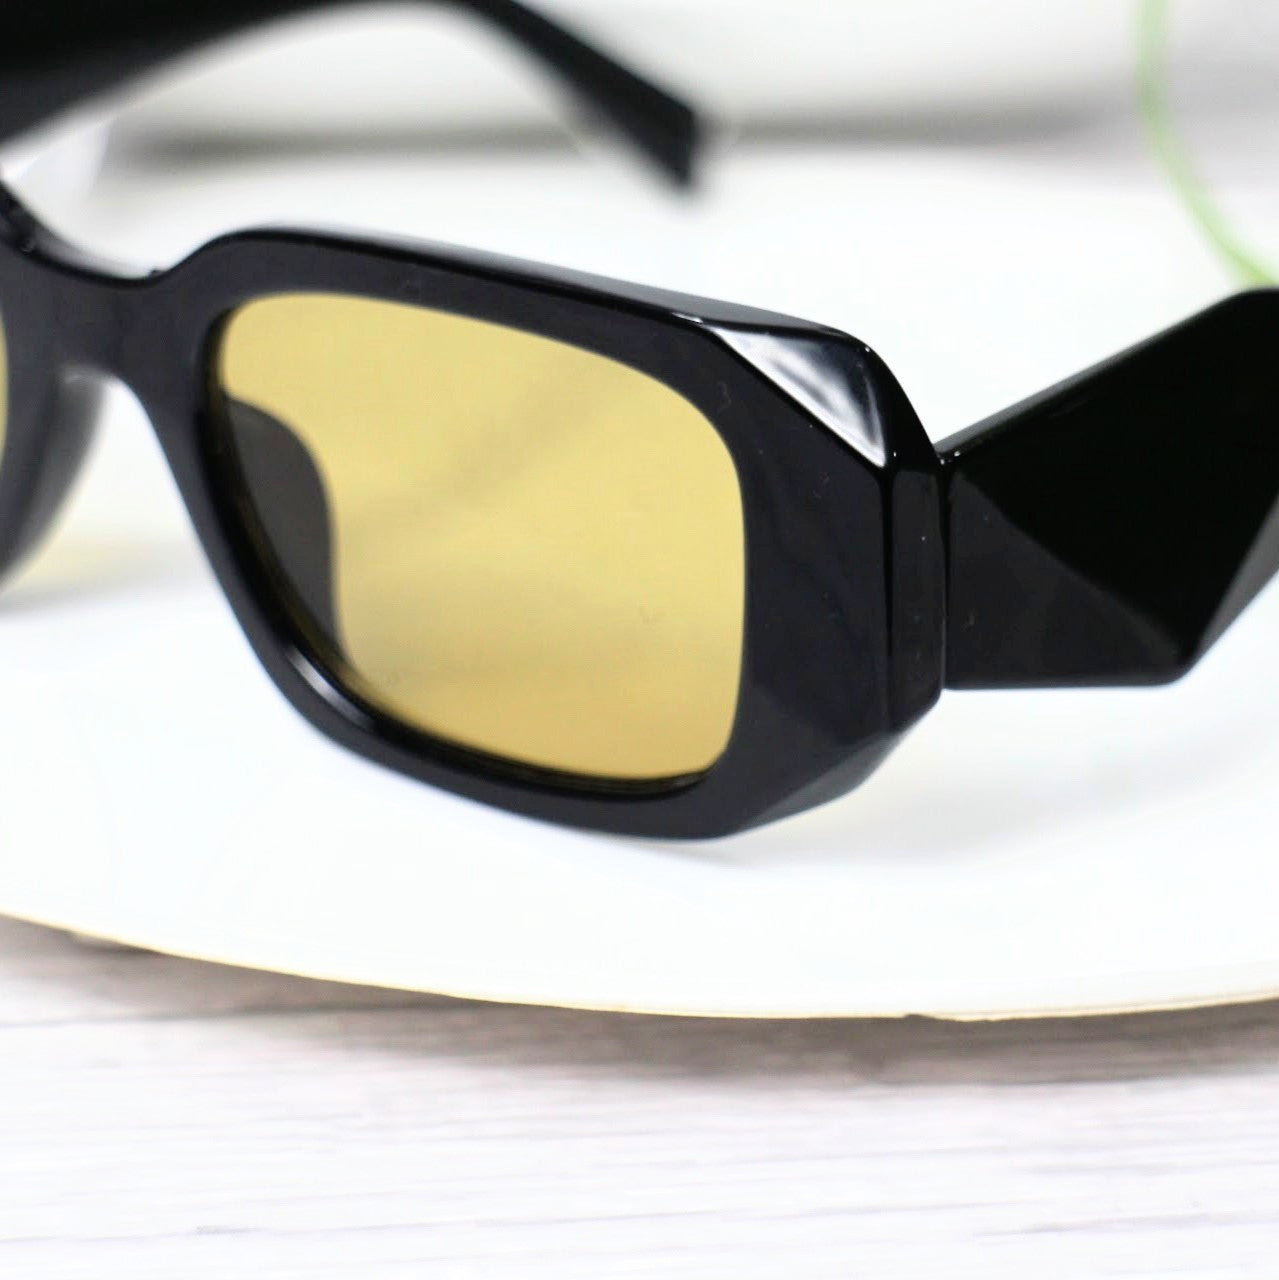 Bandit brown candy- Sunglasses